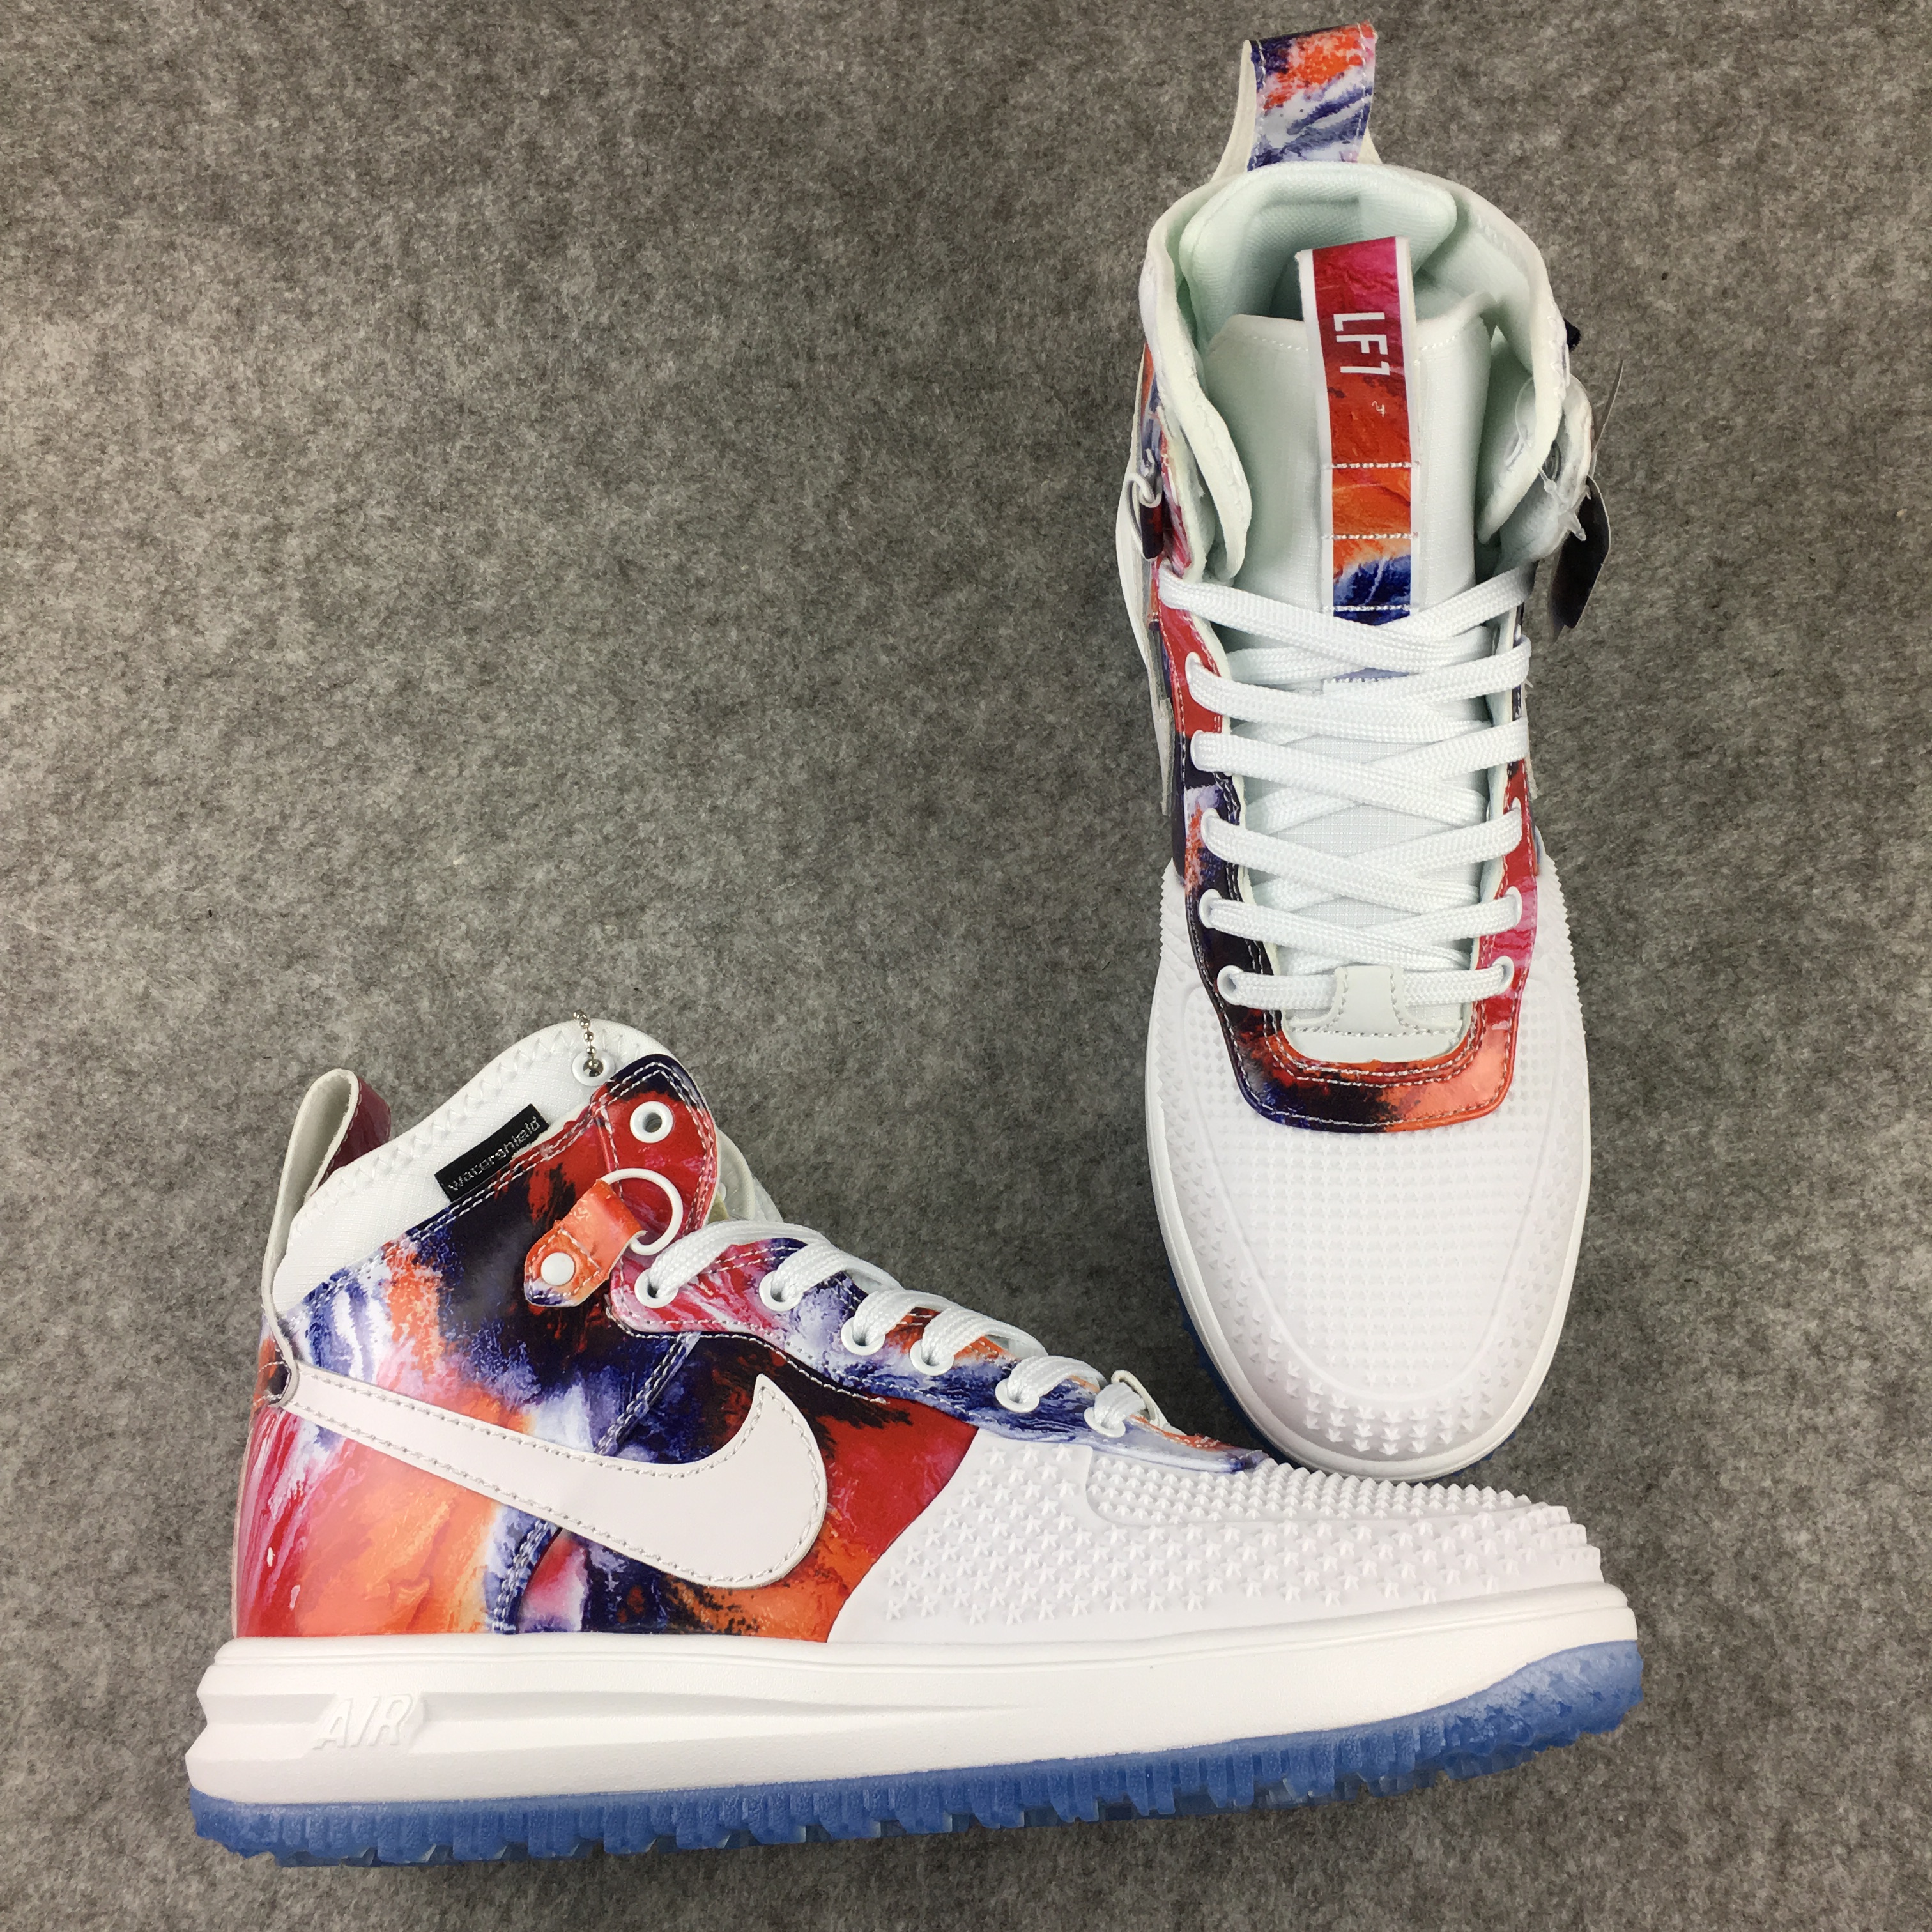 New Nike Lunar Force 1 High White Colorful Shoes